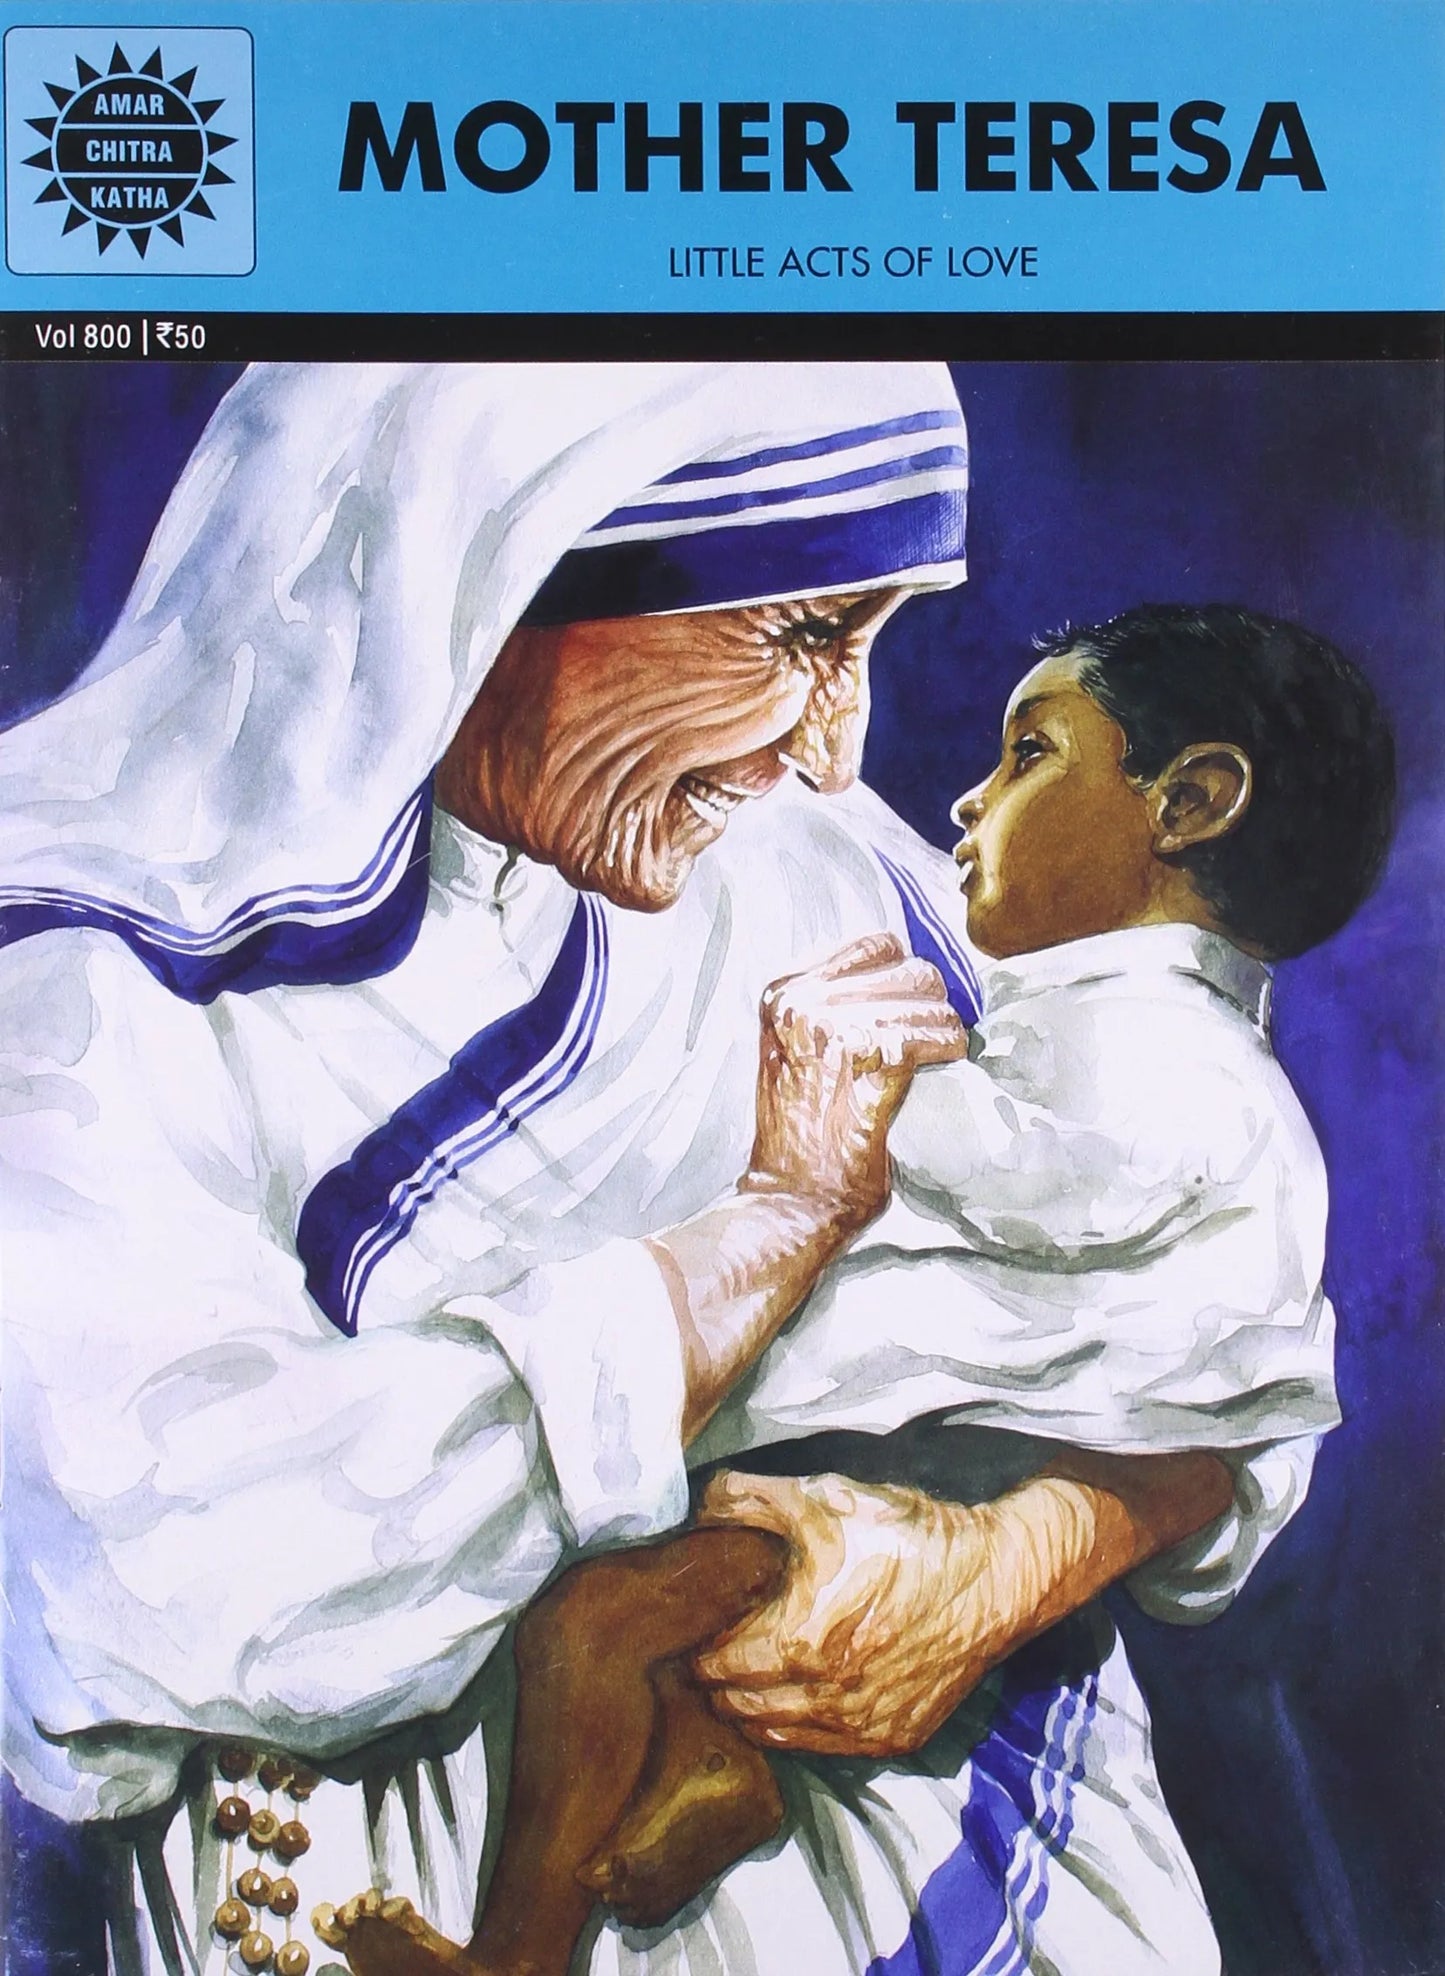 Amar Chitra Katha - Mother Teresa - Little Acts of Love